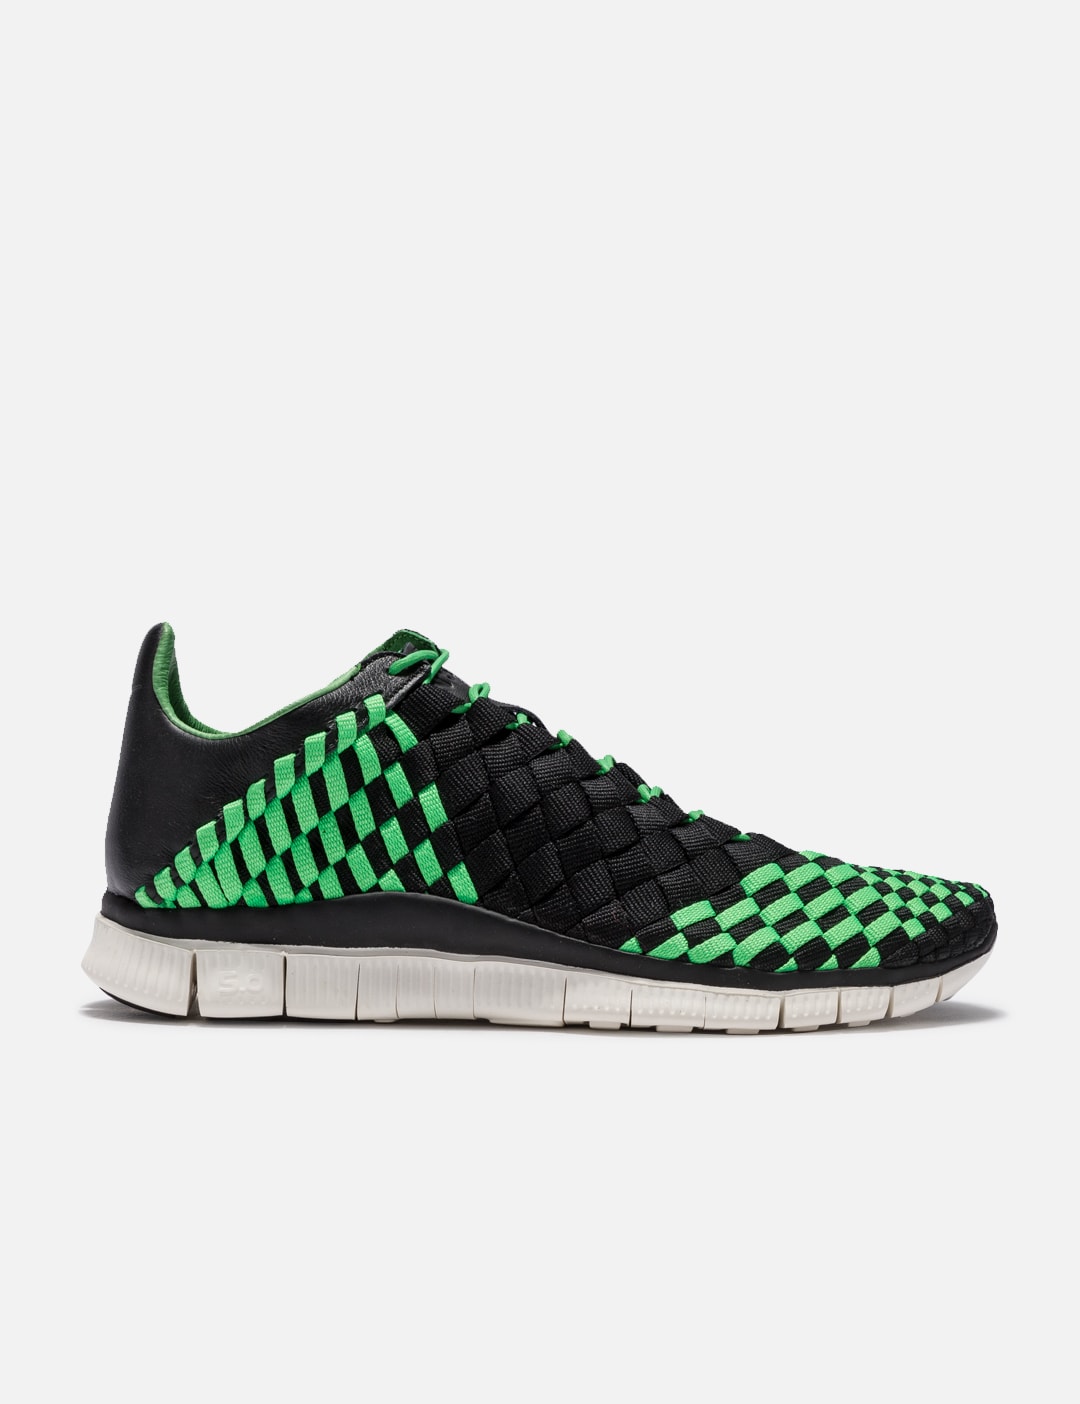 Reageren Zuidwest Wreed Nike - NIKE FREE INNEVA WOVEN | HBX - Globally Curated Fashion and  Lifestyle by Hypebeast